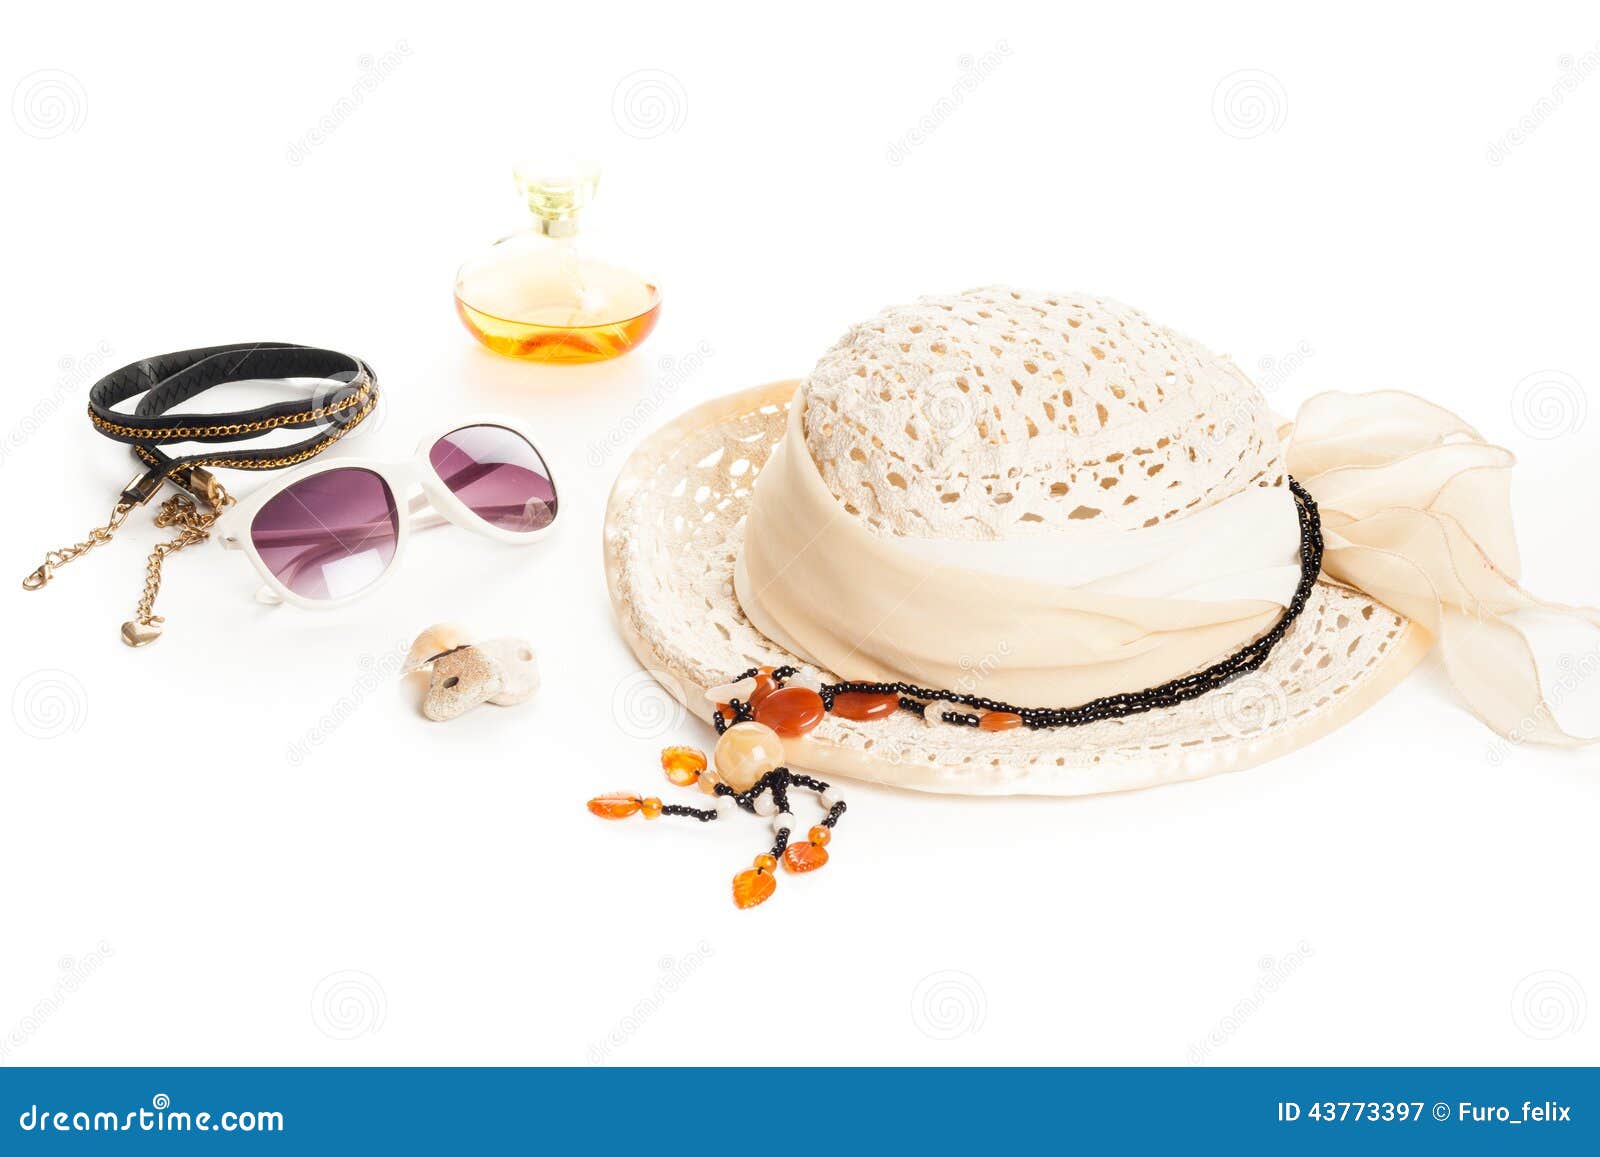 Summer fashion accessories stock image. Image of leisure - 43773397